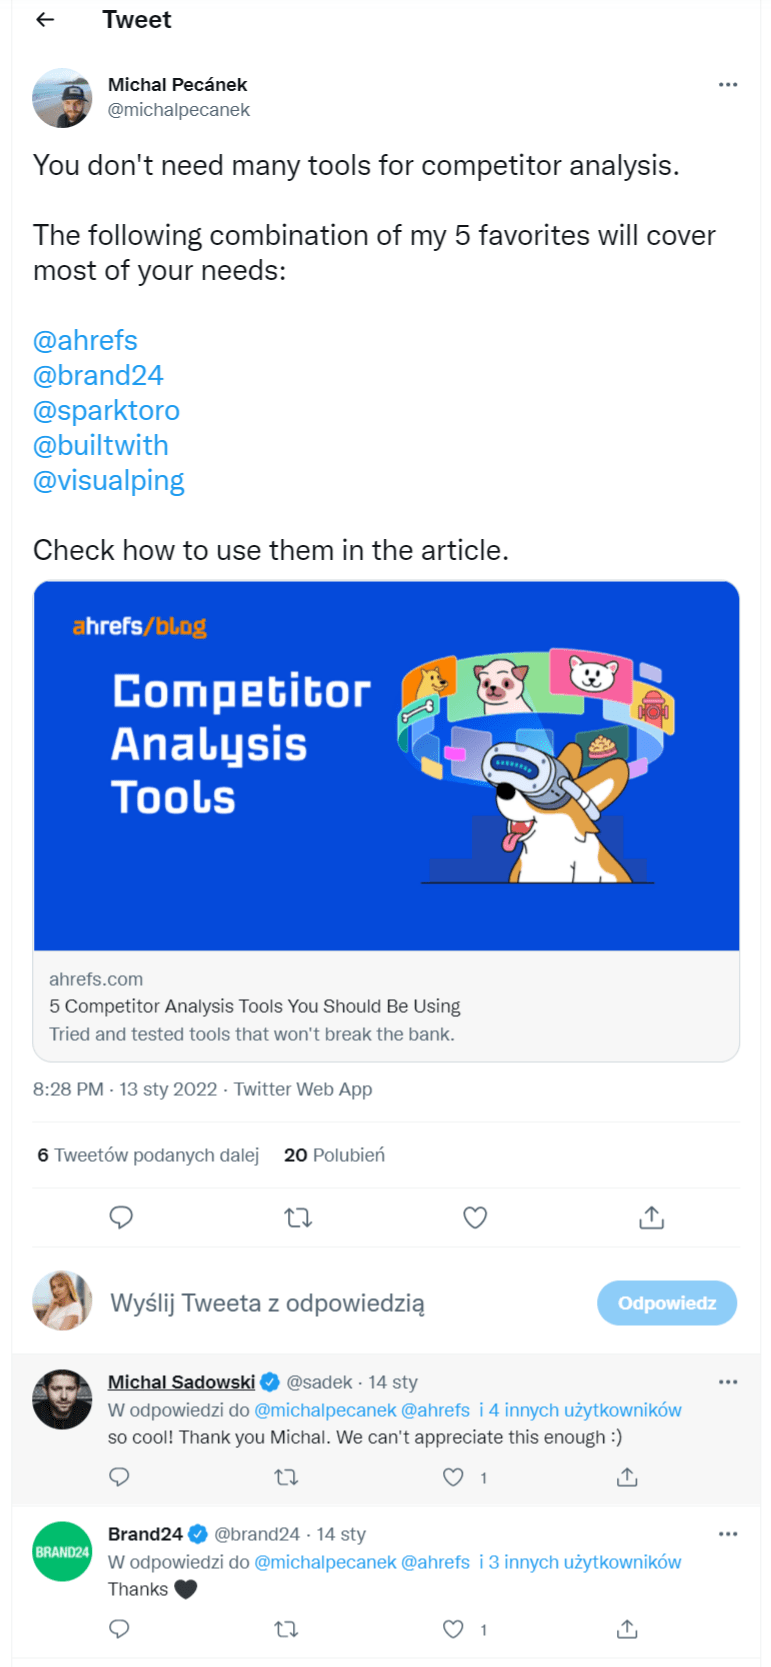 Ahrefs mentioned Brand24 on Twitter